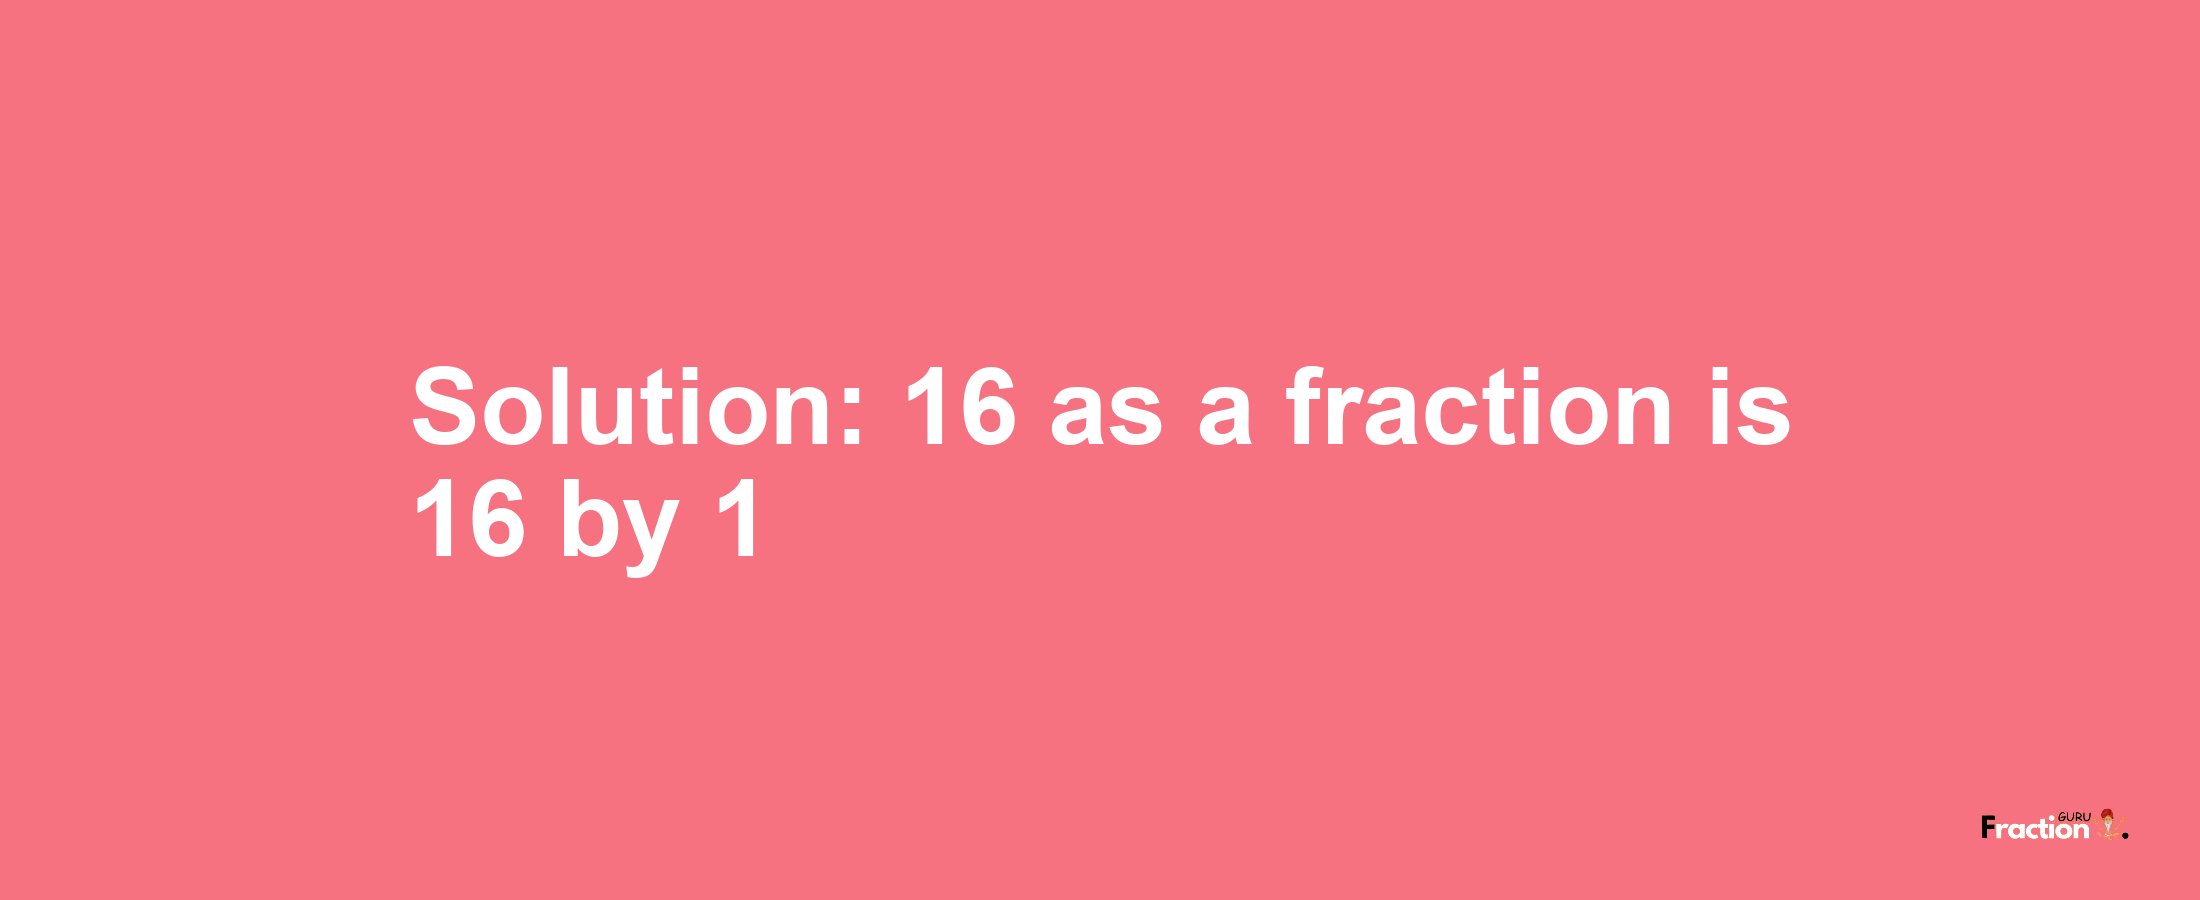 Solution:16 as a fraction is 16/1